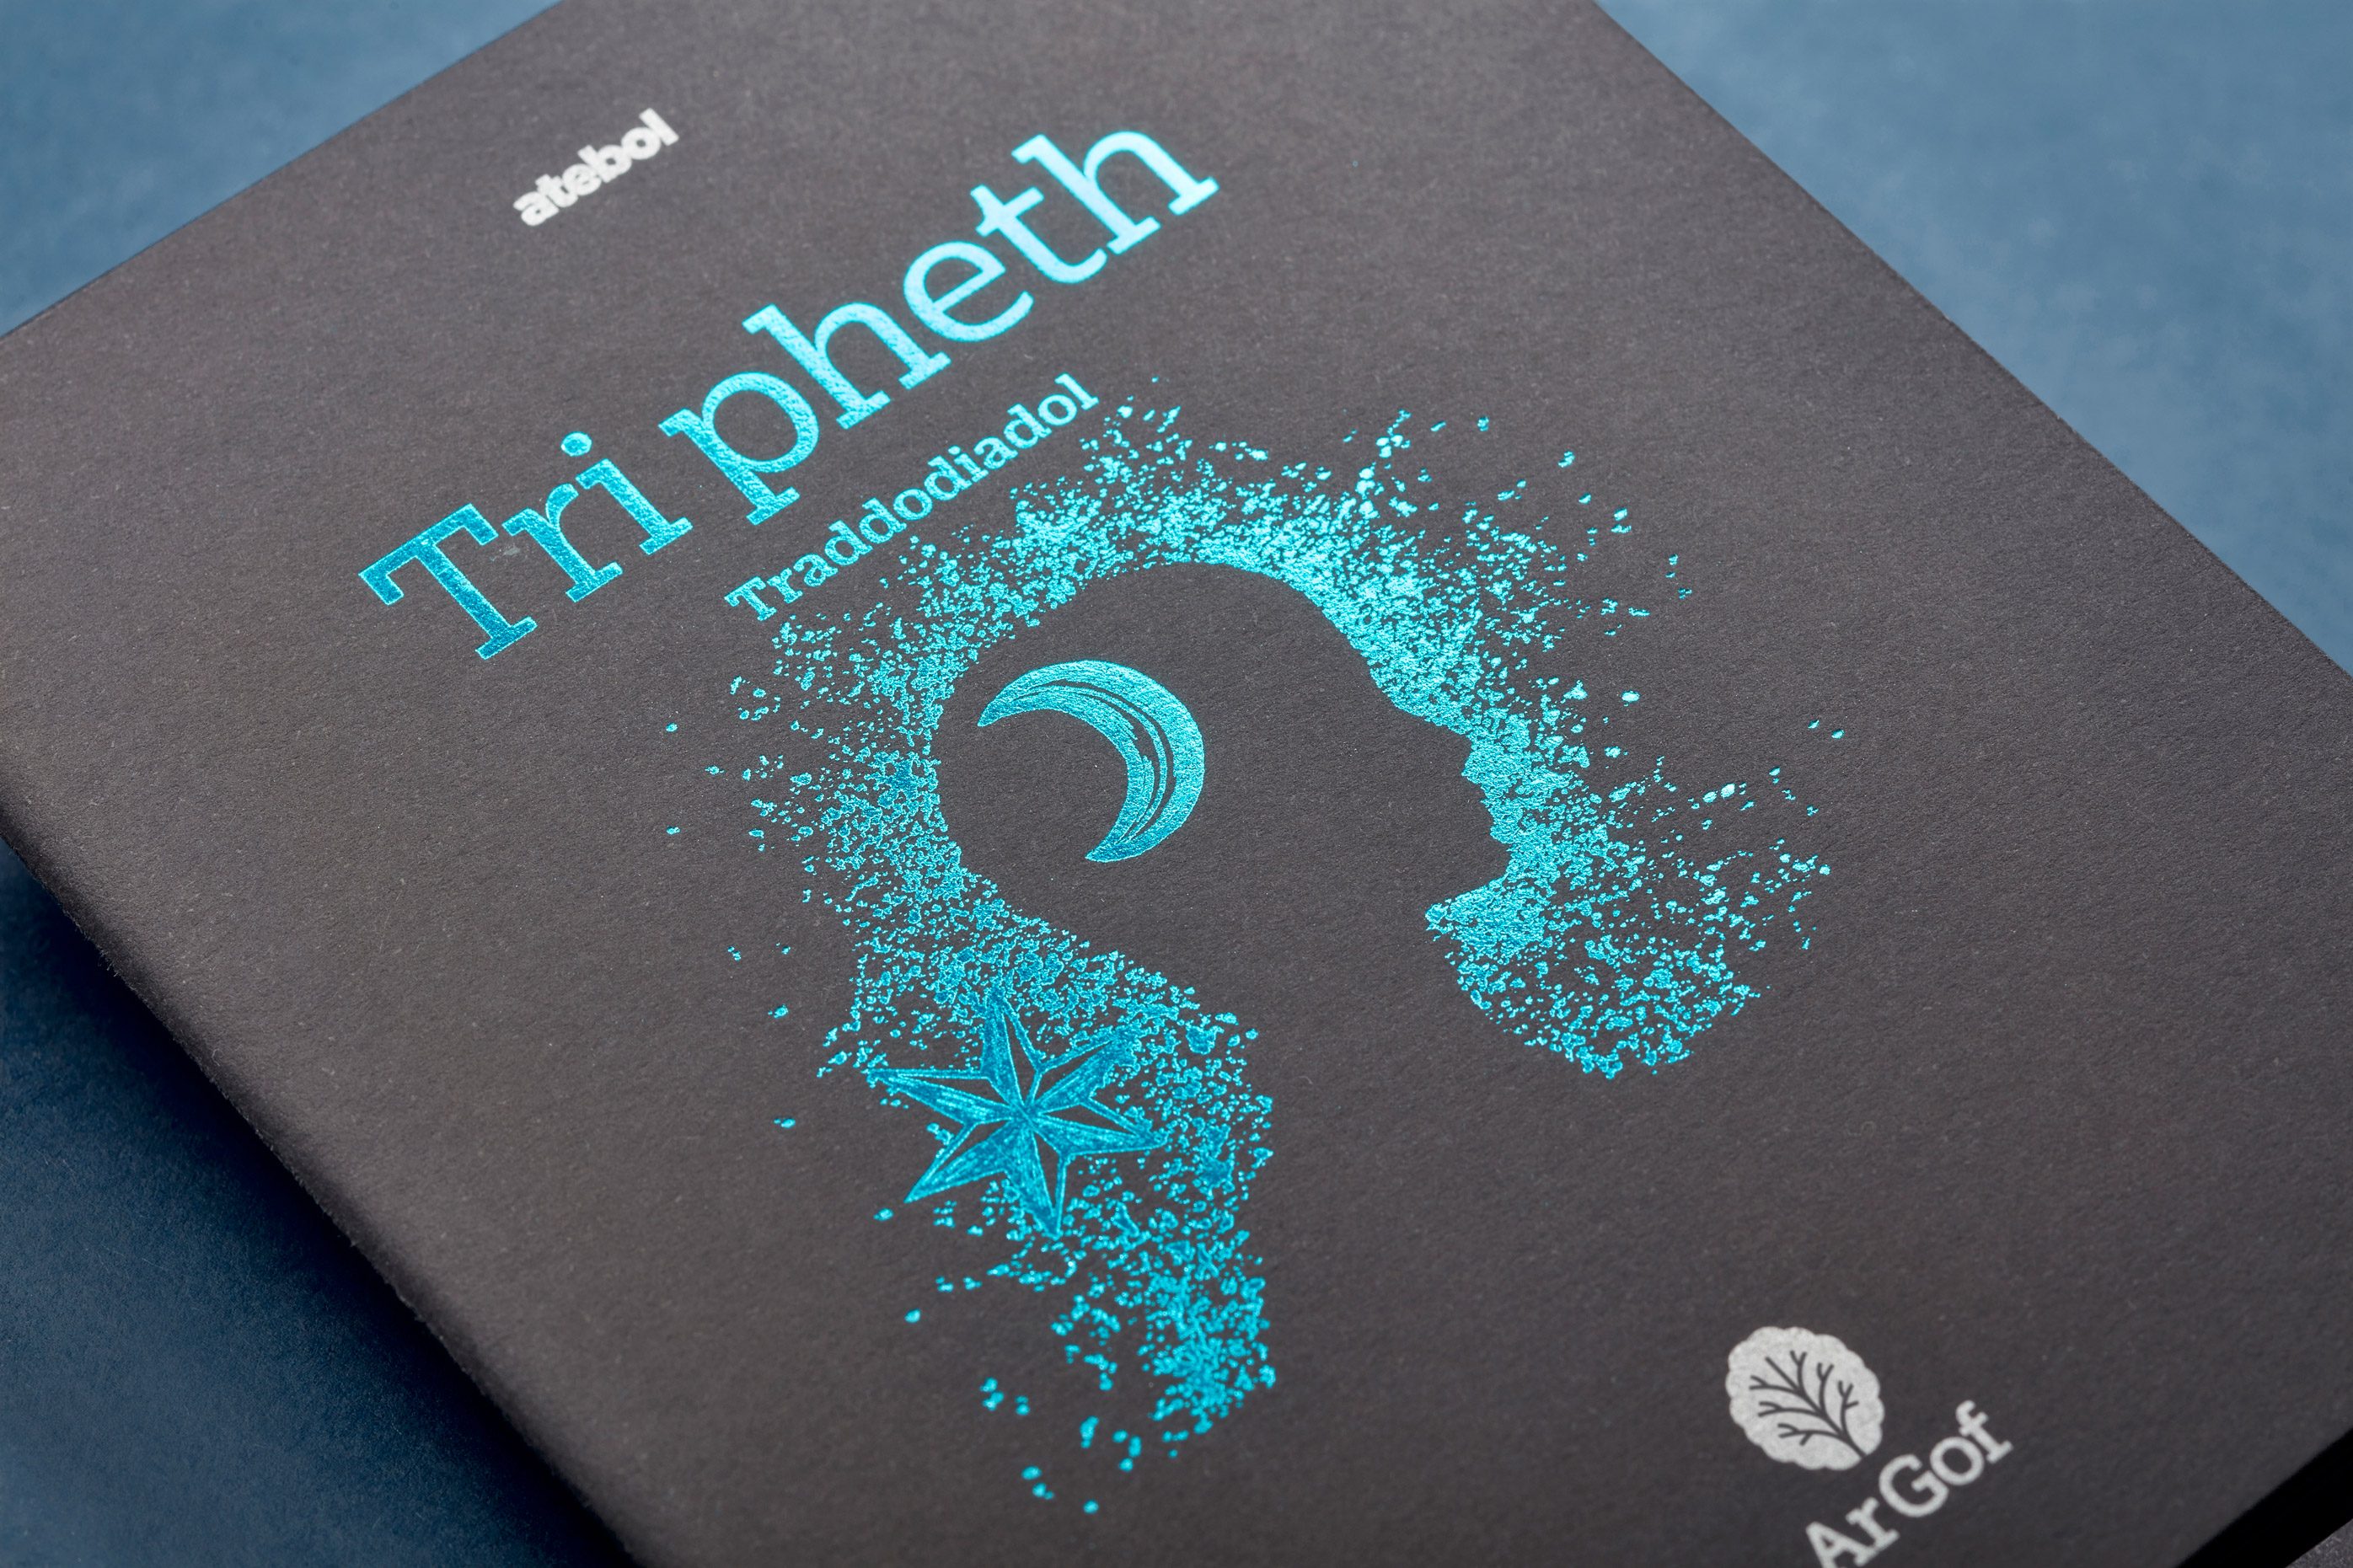 Close-up of poetry book cover showing illustration printed in turquoise foil